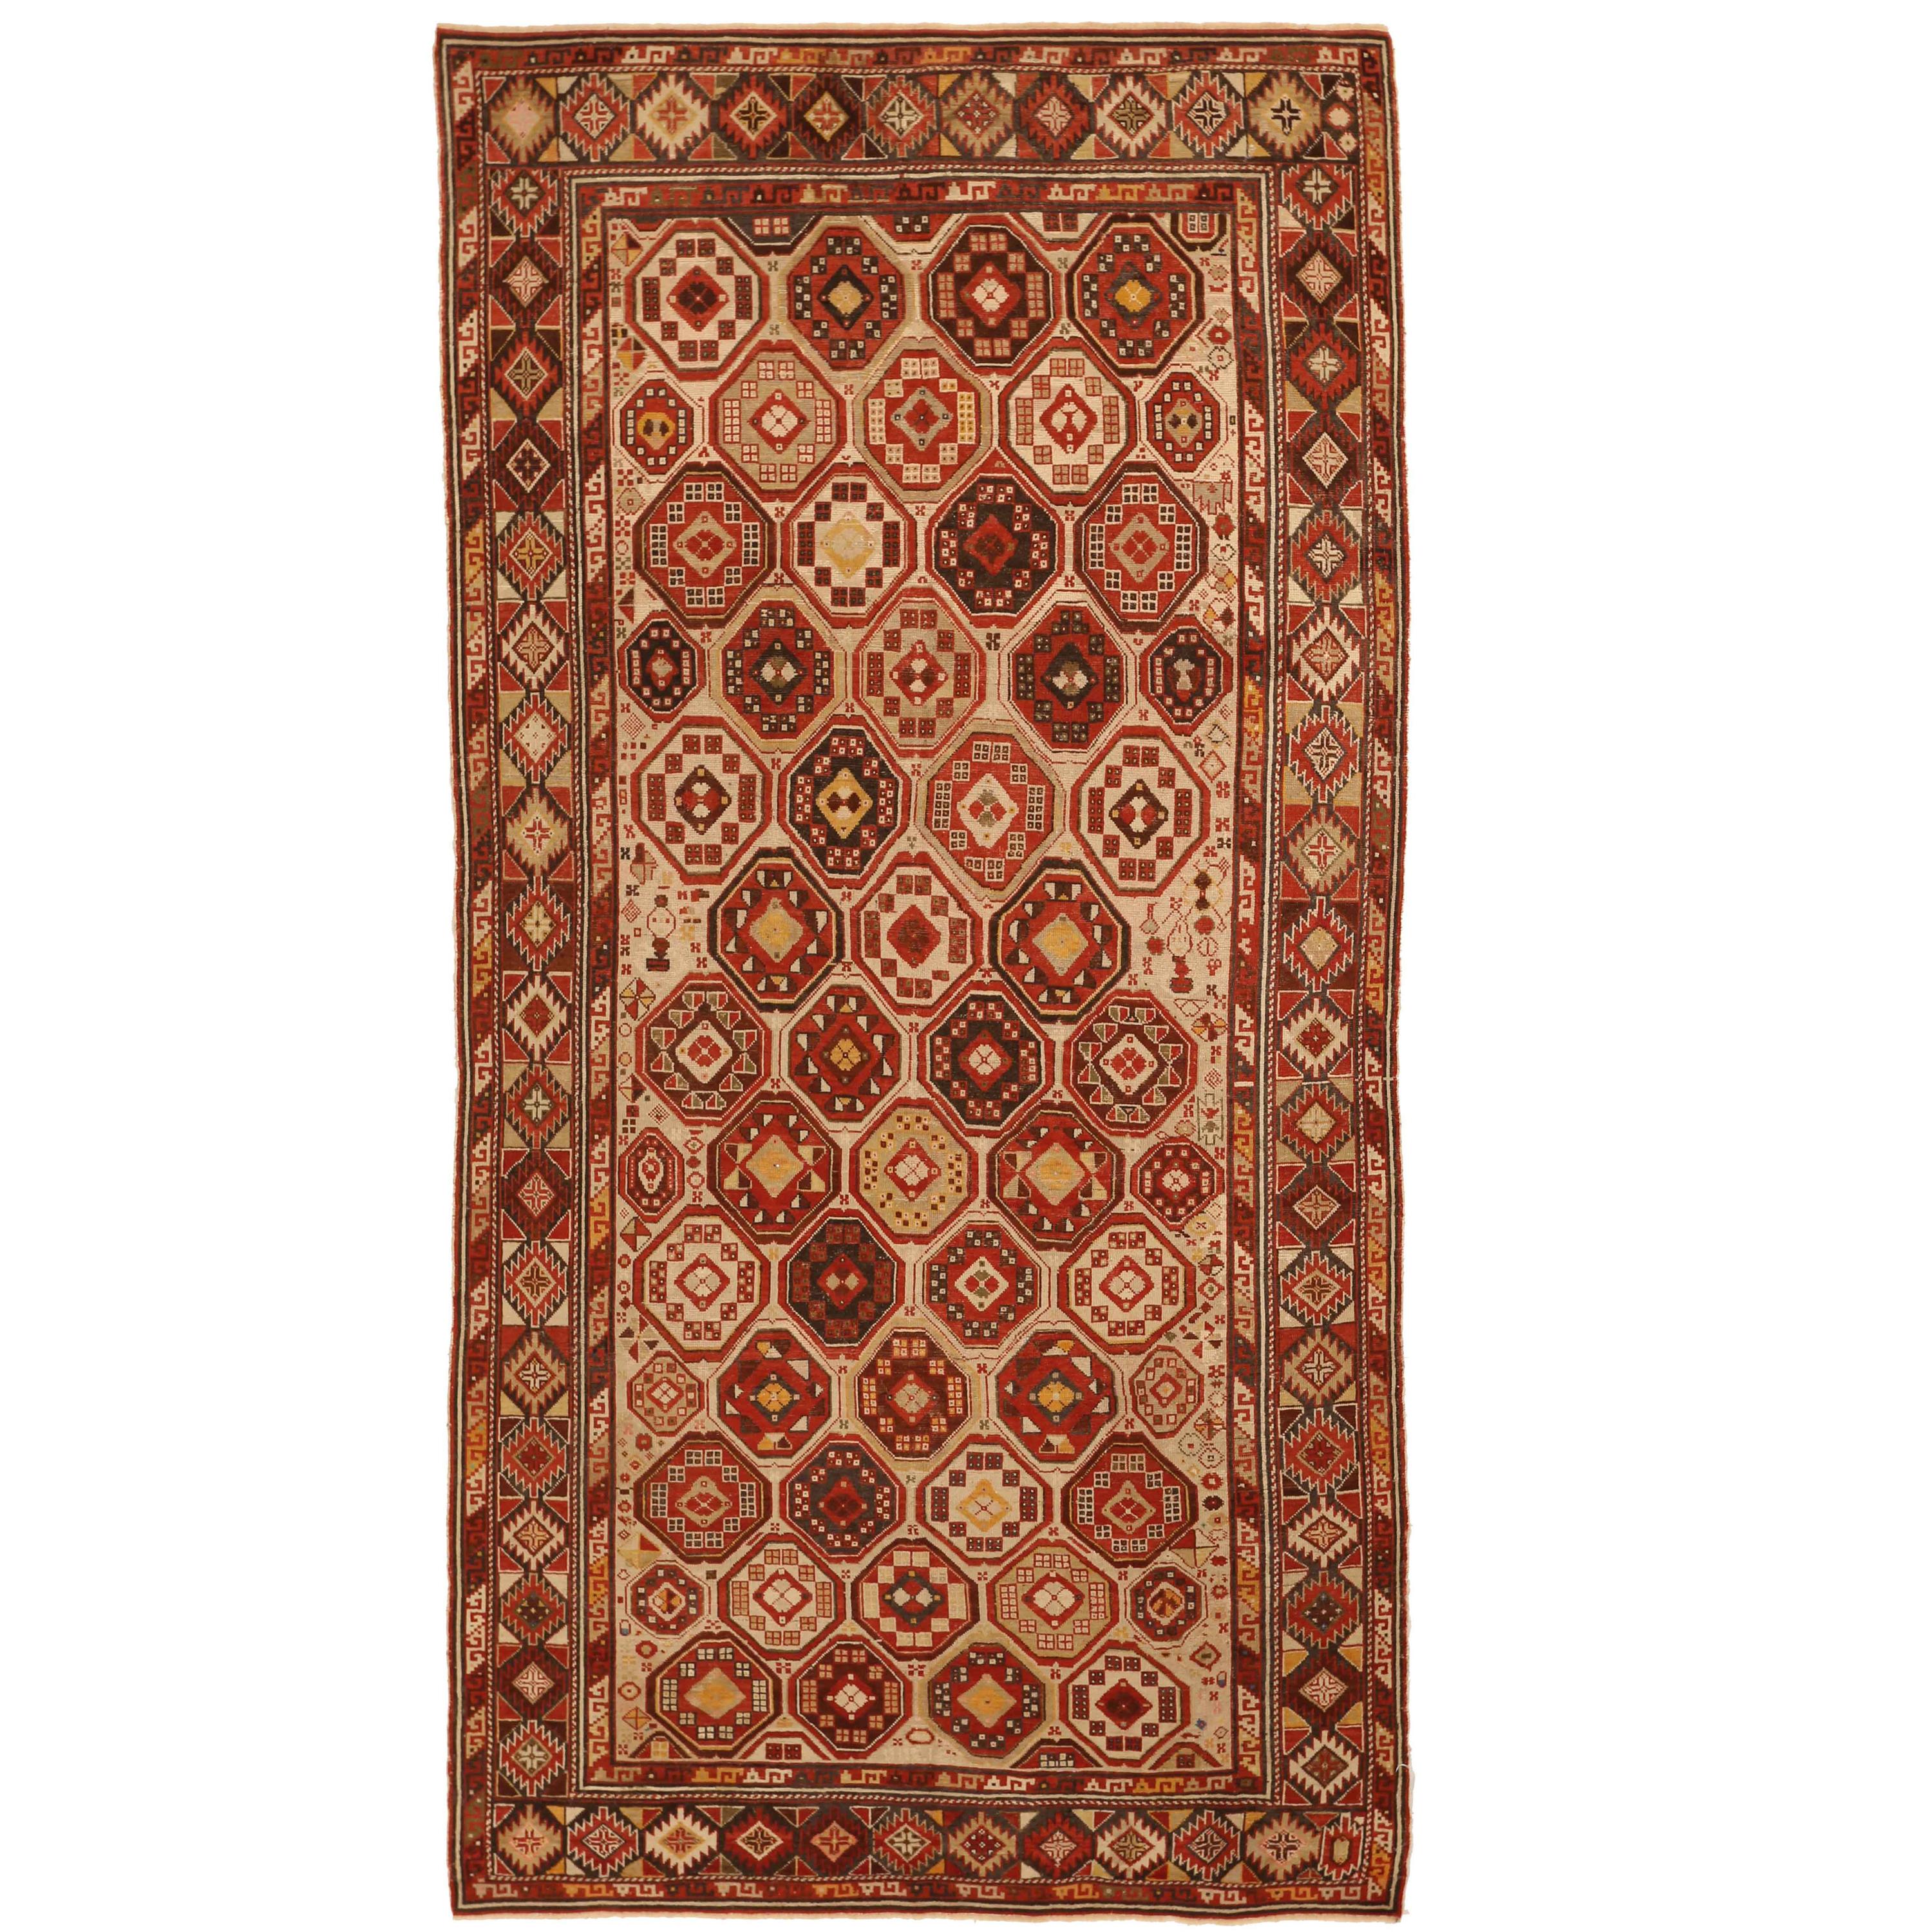 Antique Russian Rug Shirvan Style with Intricate Geometric Patterns, circa 1900s